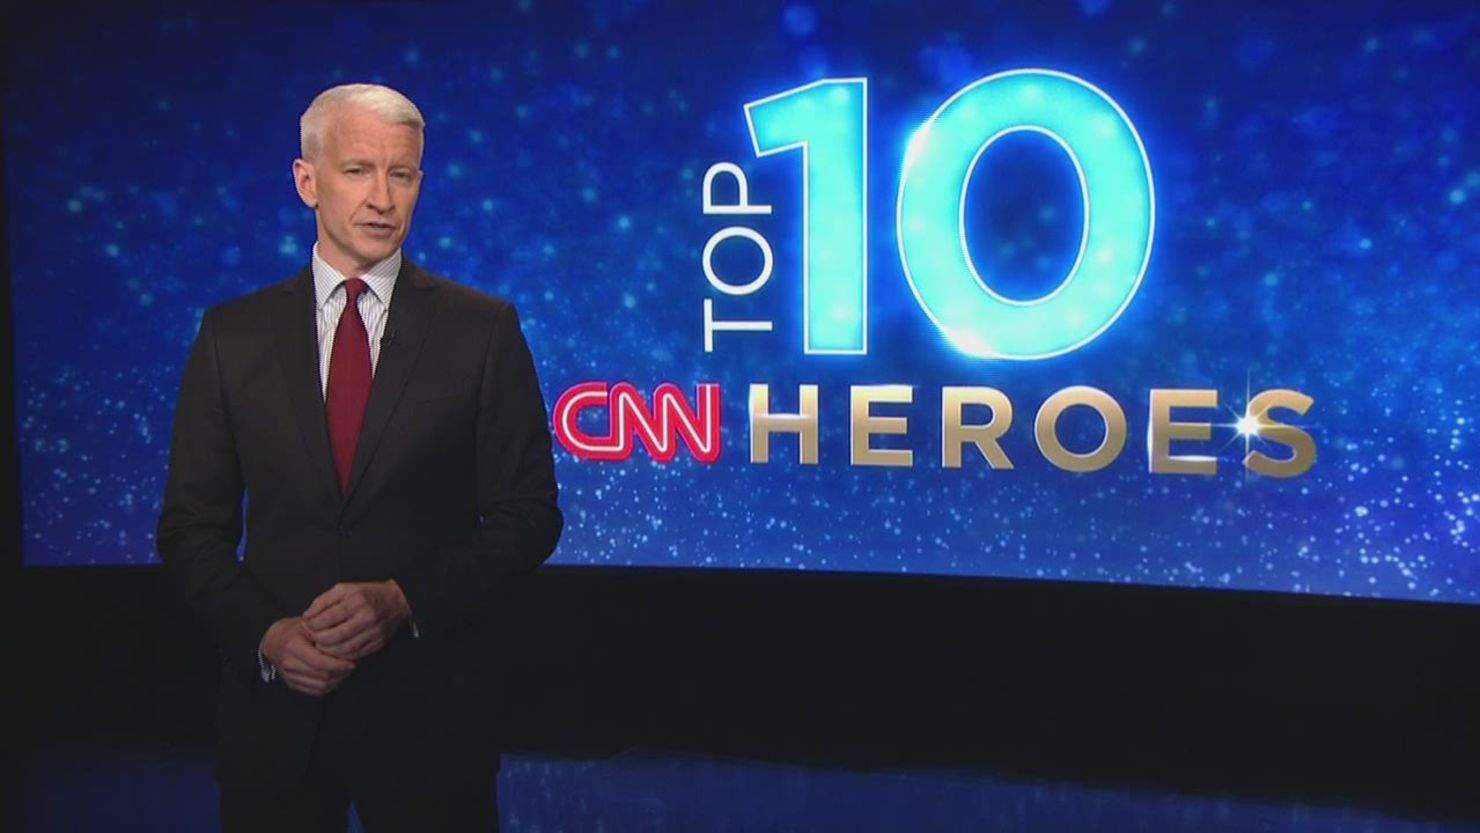 Anderson Cooper will reveal CNN's Top 10 Heroes for 2015 Thursday morning on CNN's "New Day."